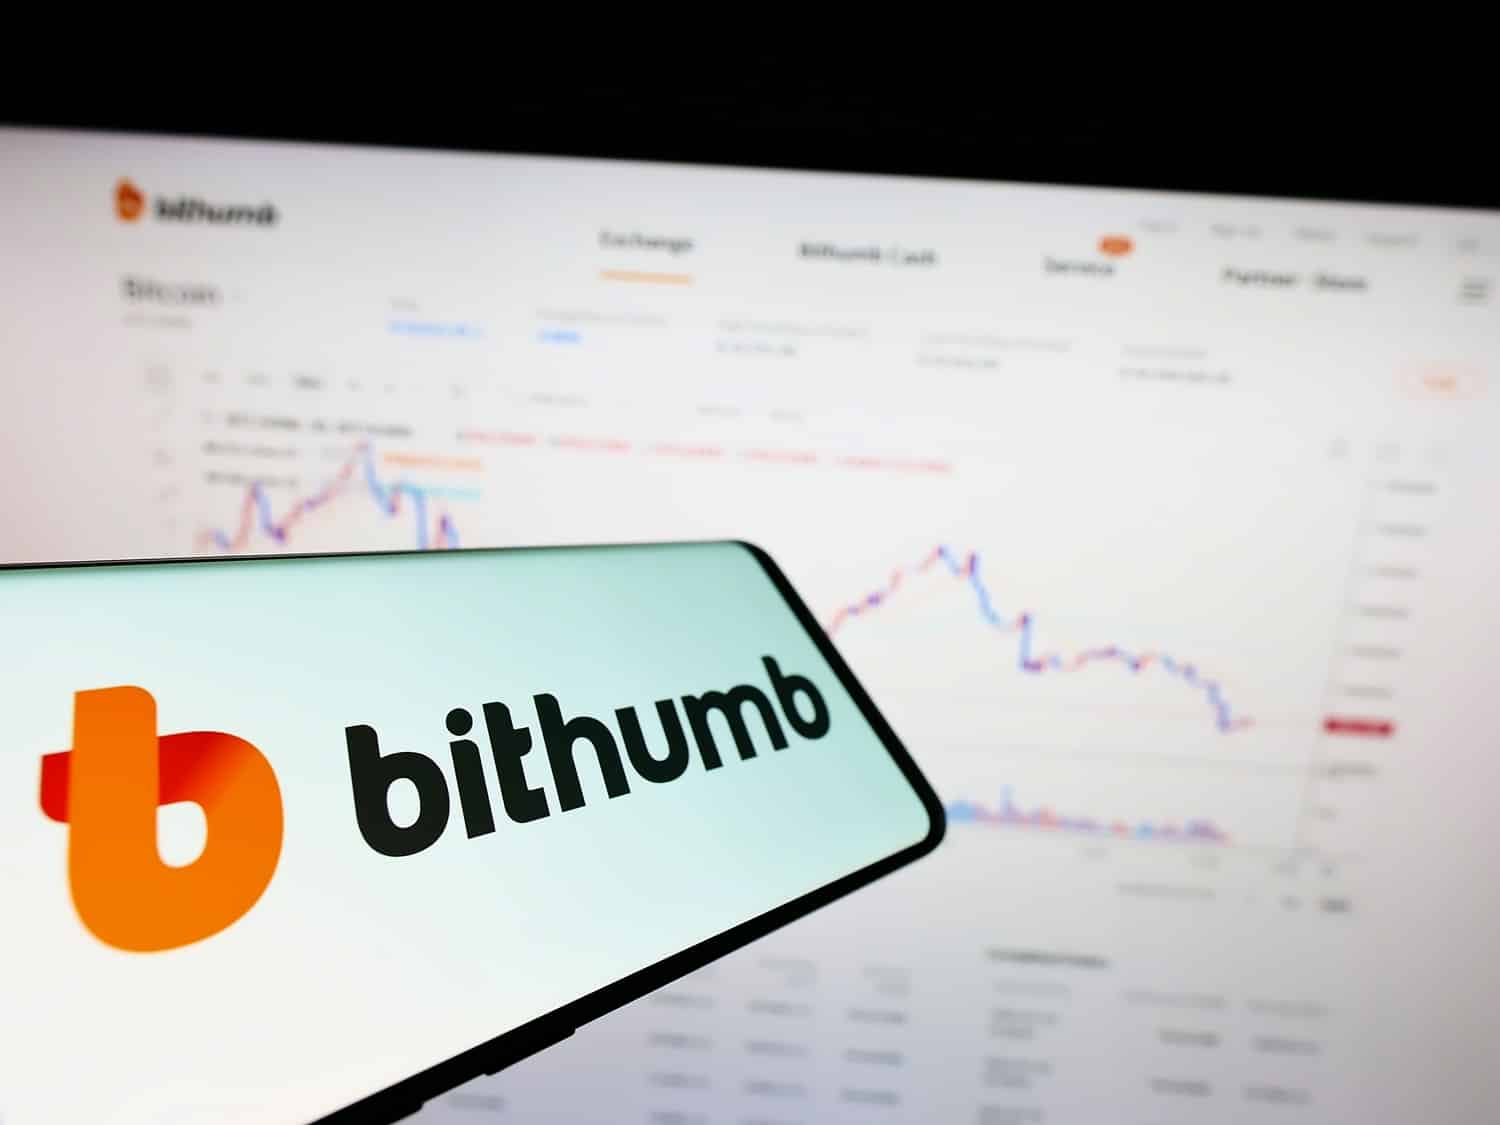 A mobile phone displaying the logo of the South Korean crypto exchange Bithumb in front of a laptop screen.